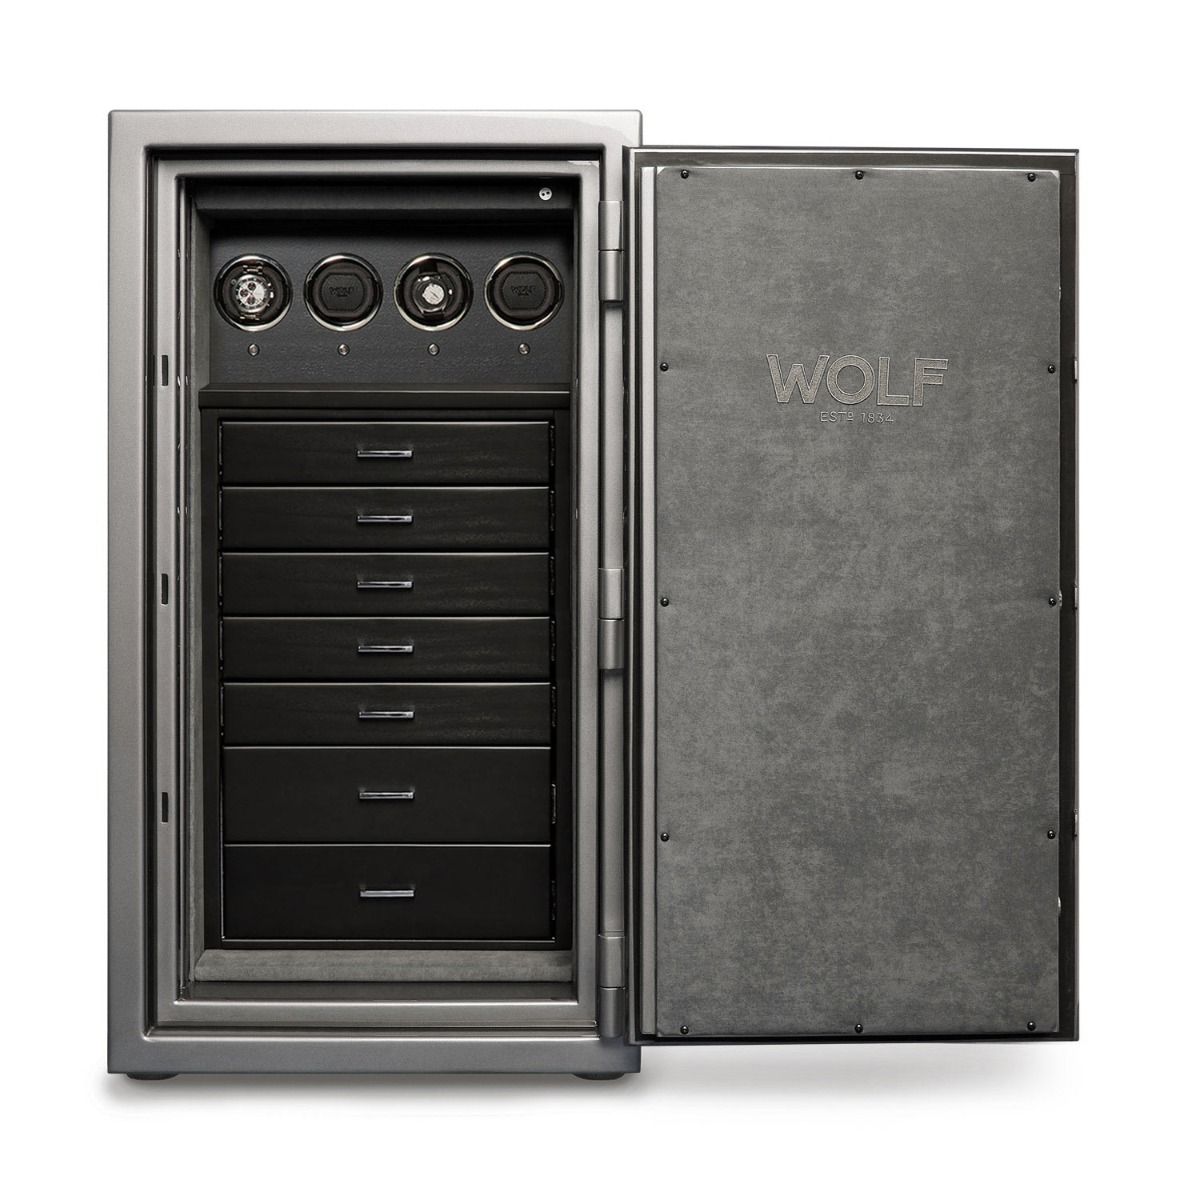 WOLF ATLAS Titanium Watch Winder Safe with Multiple Drawers - Durable &amp; Secure Storage